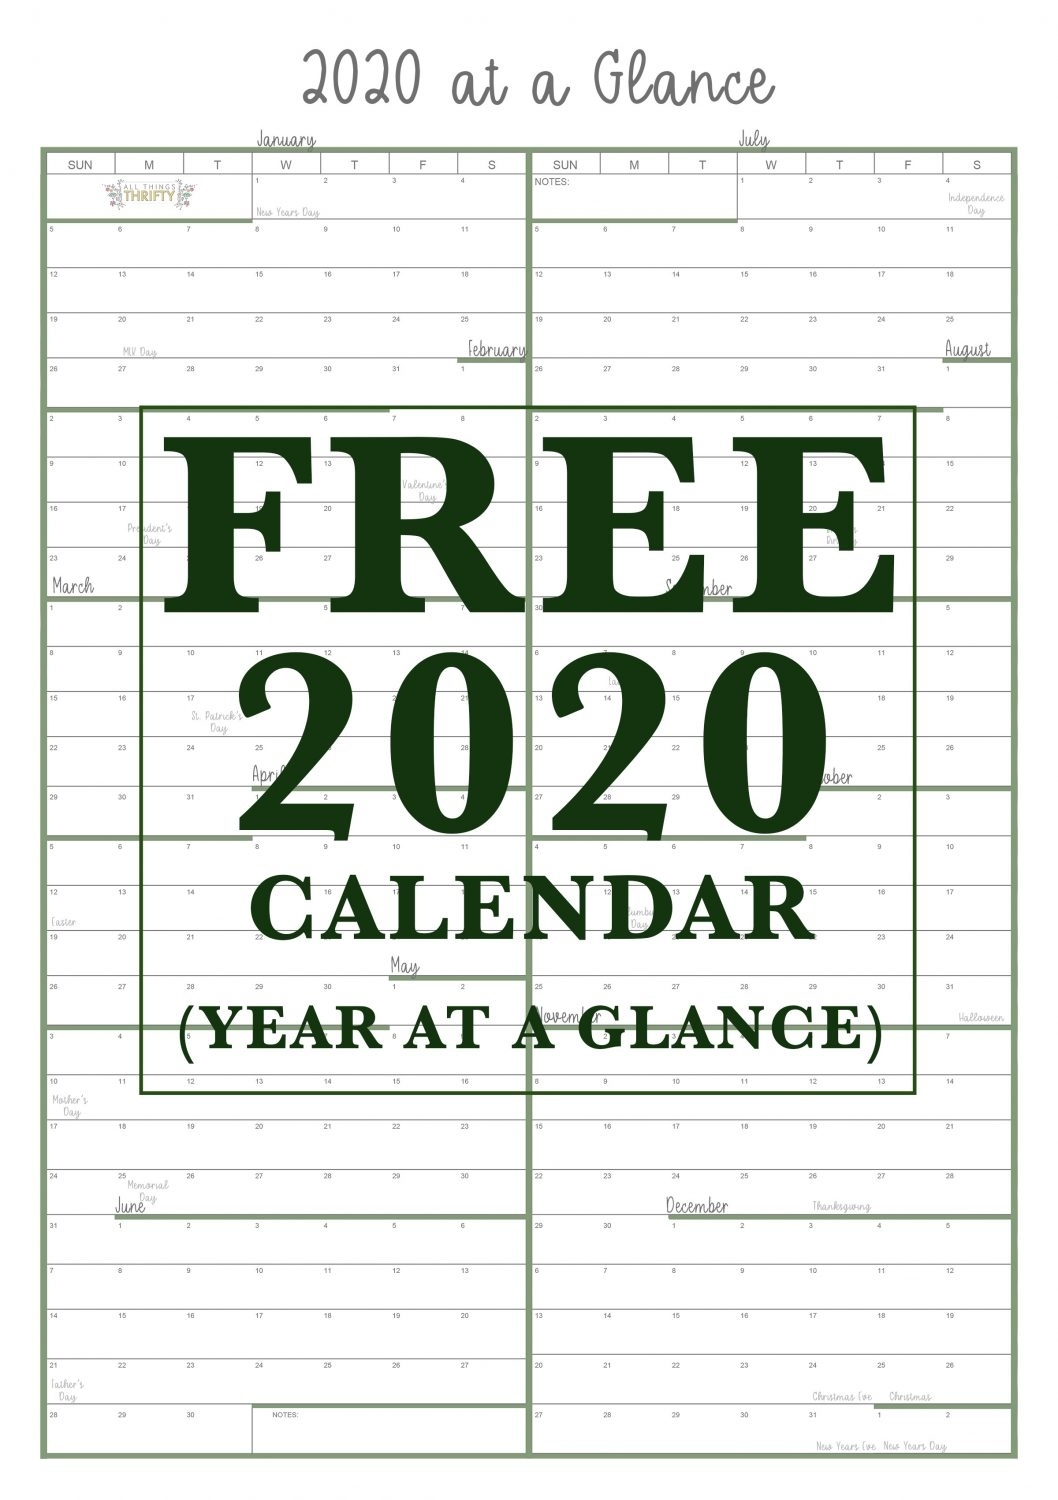 Year At A Glance Free Printable Calendar | All Things Thrifty pertaining to 2020 Calendar At A Glance Printable